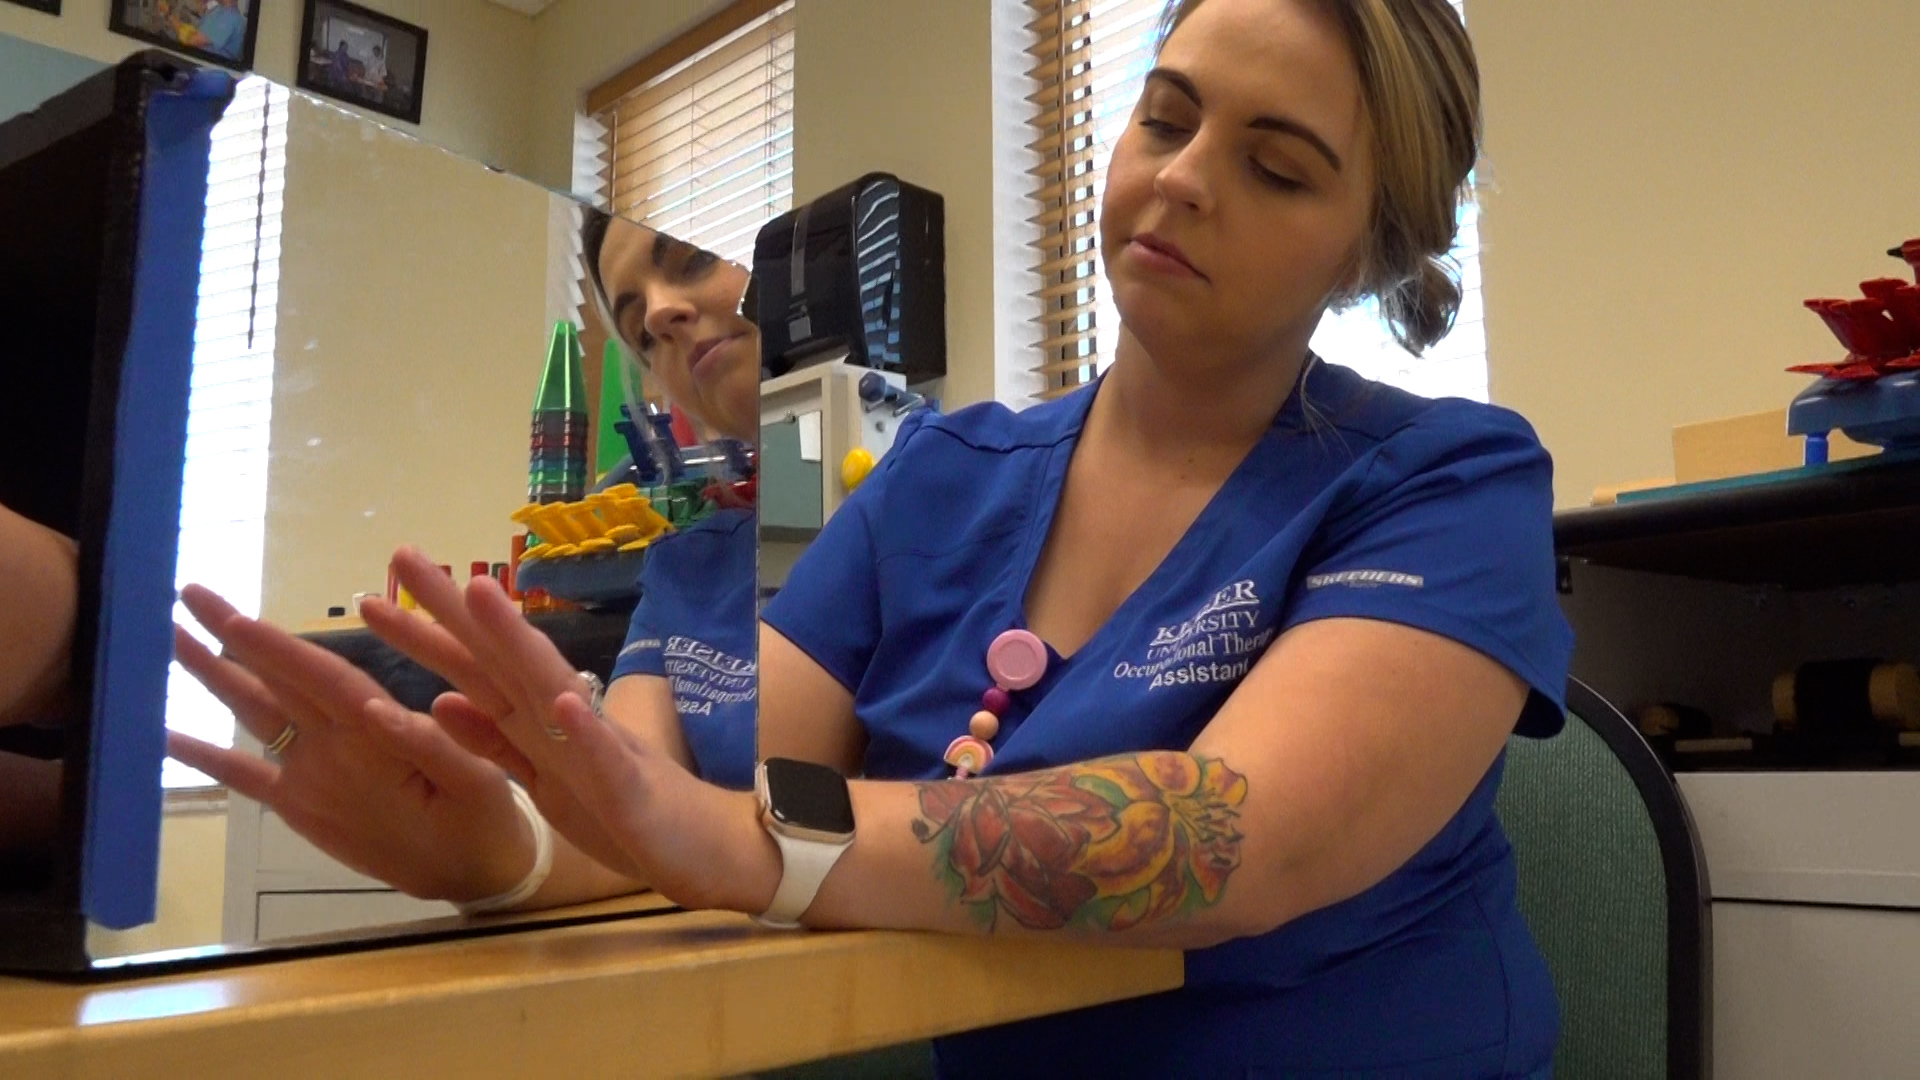 Keiser University Tampa student discovers new career helping others with occupational therapy